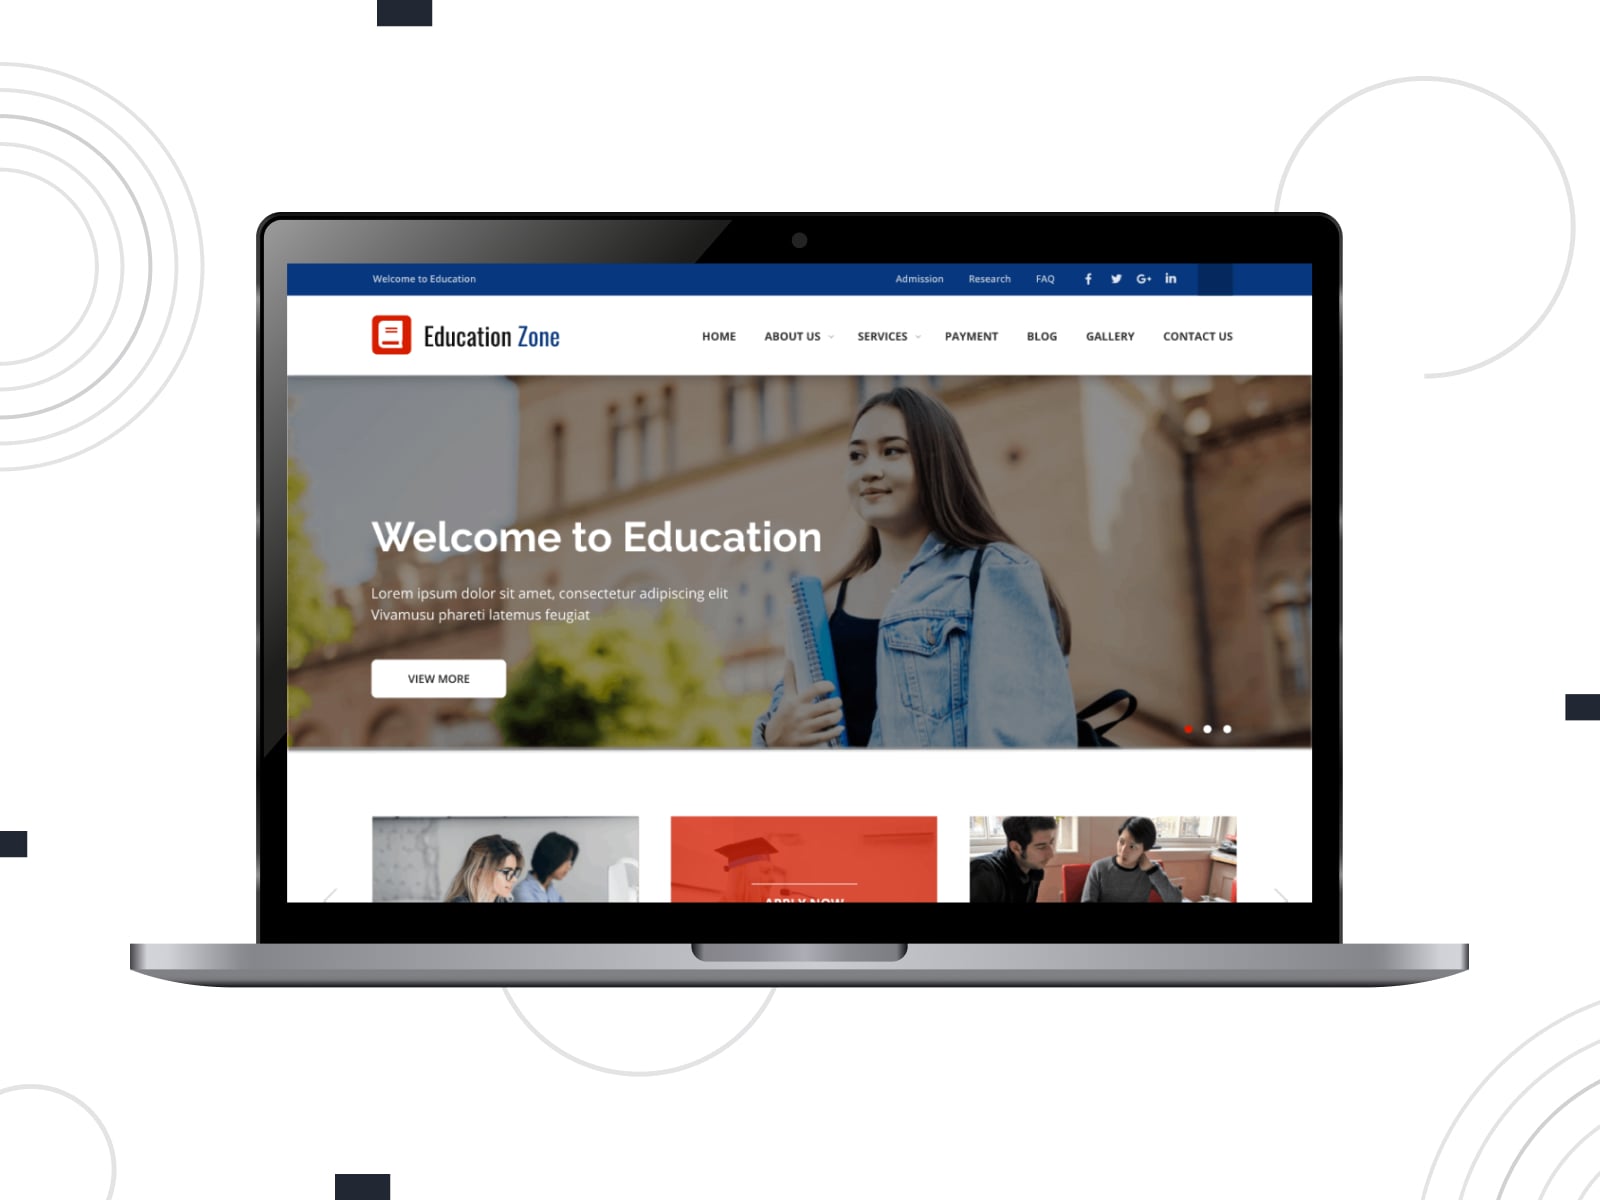 Collage of the Educational Zone free wordpress theme for teachers sites on mobile and desktop screens.